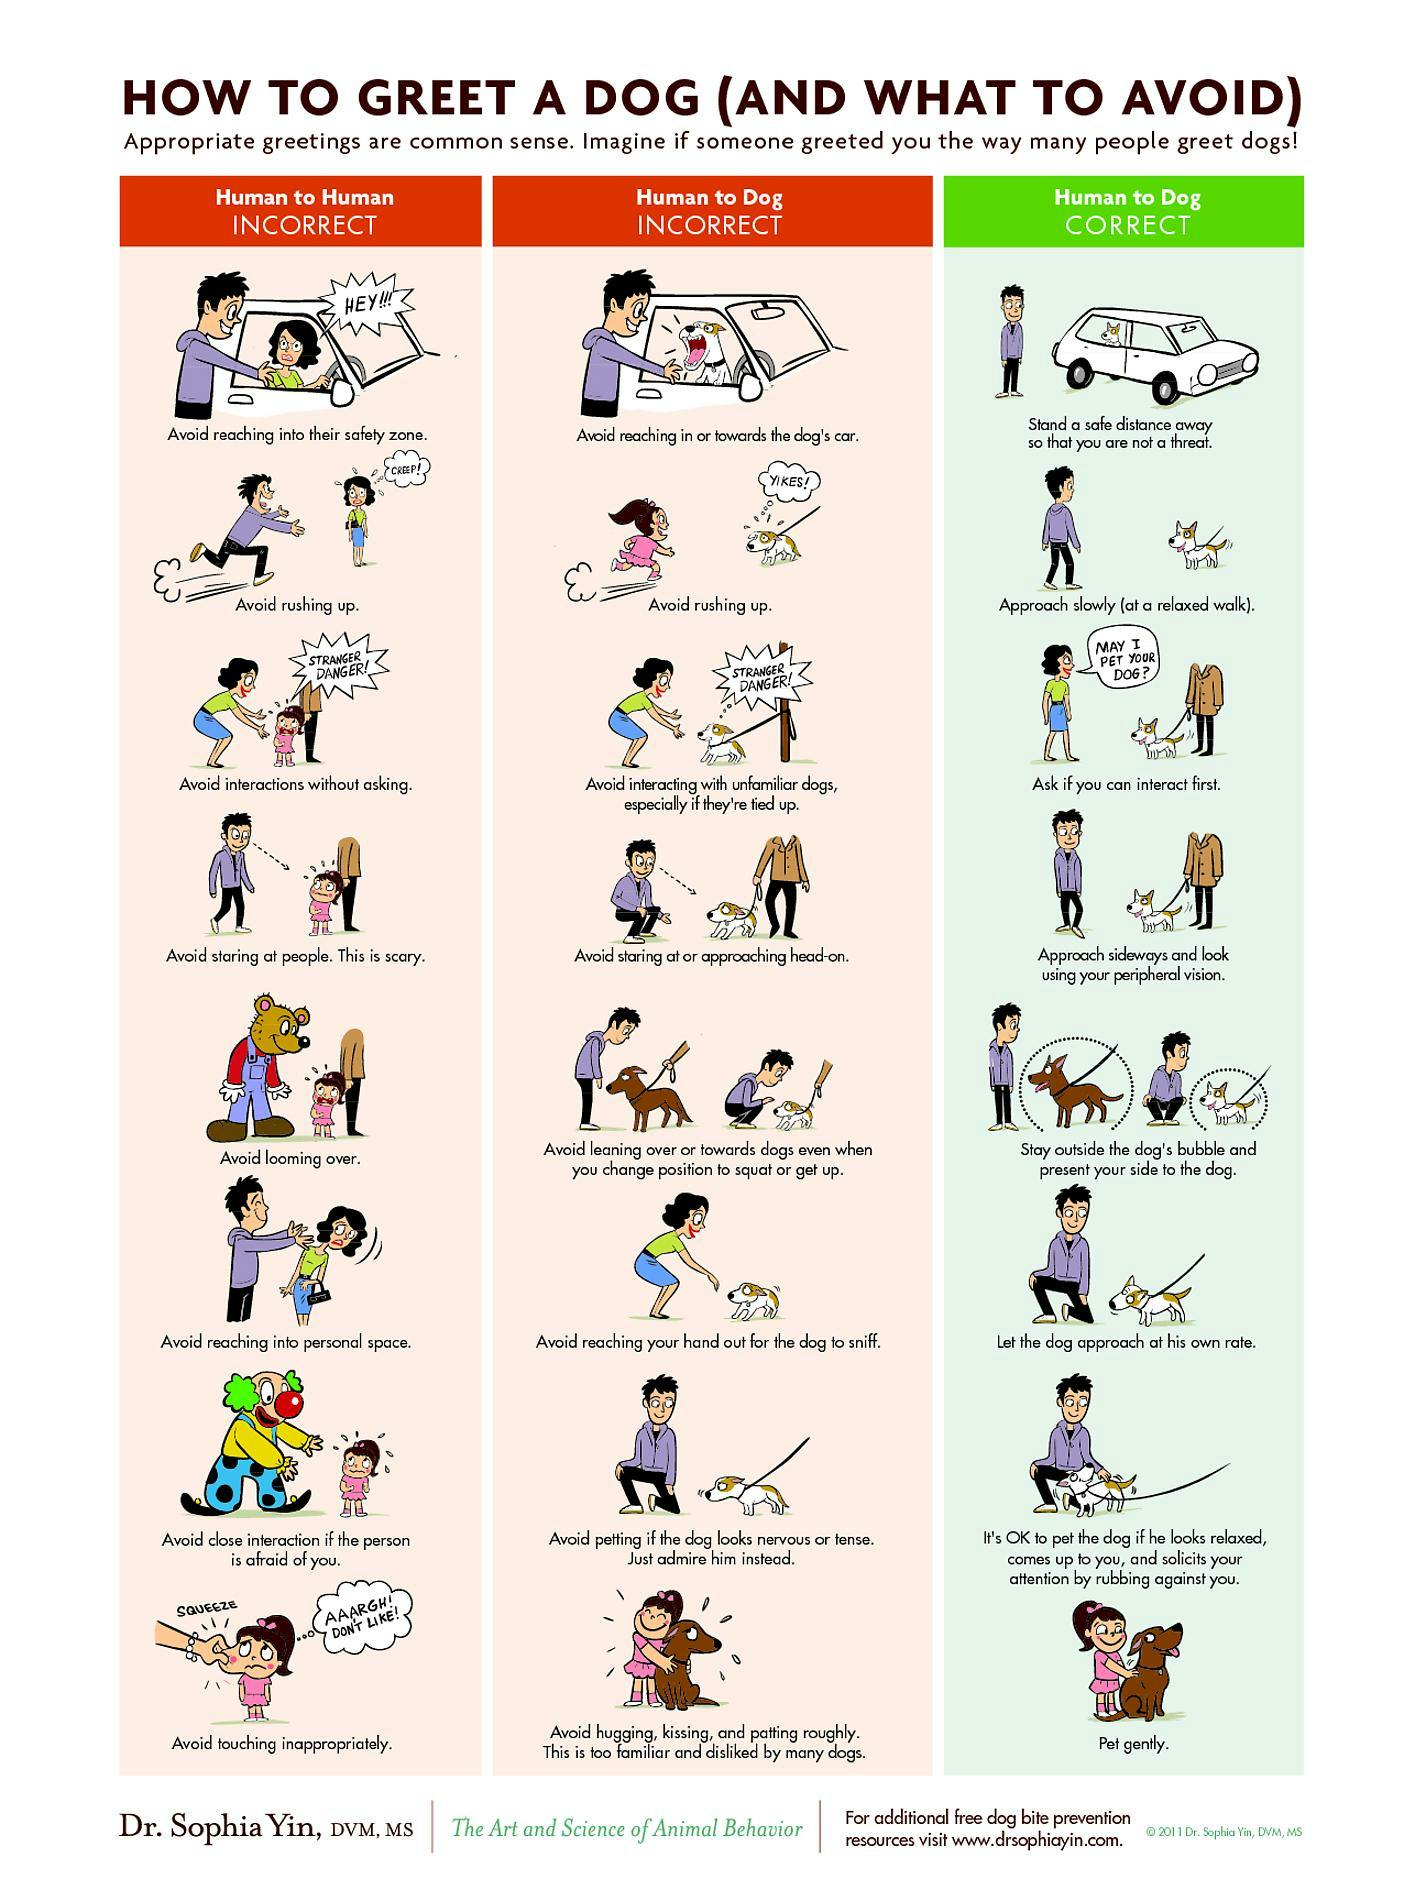 How to Greet a Dog (and What to Avoid) poster